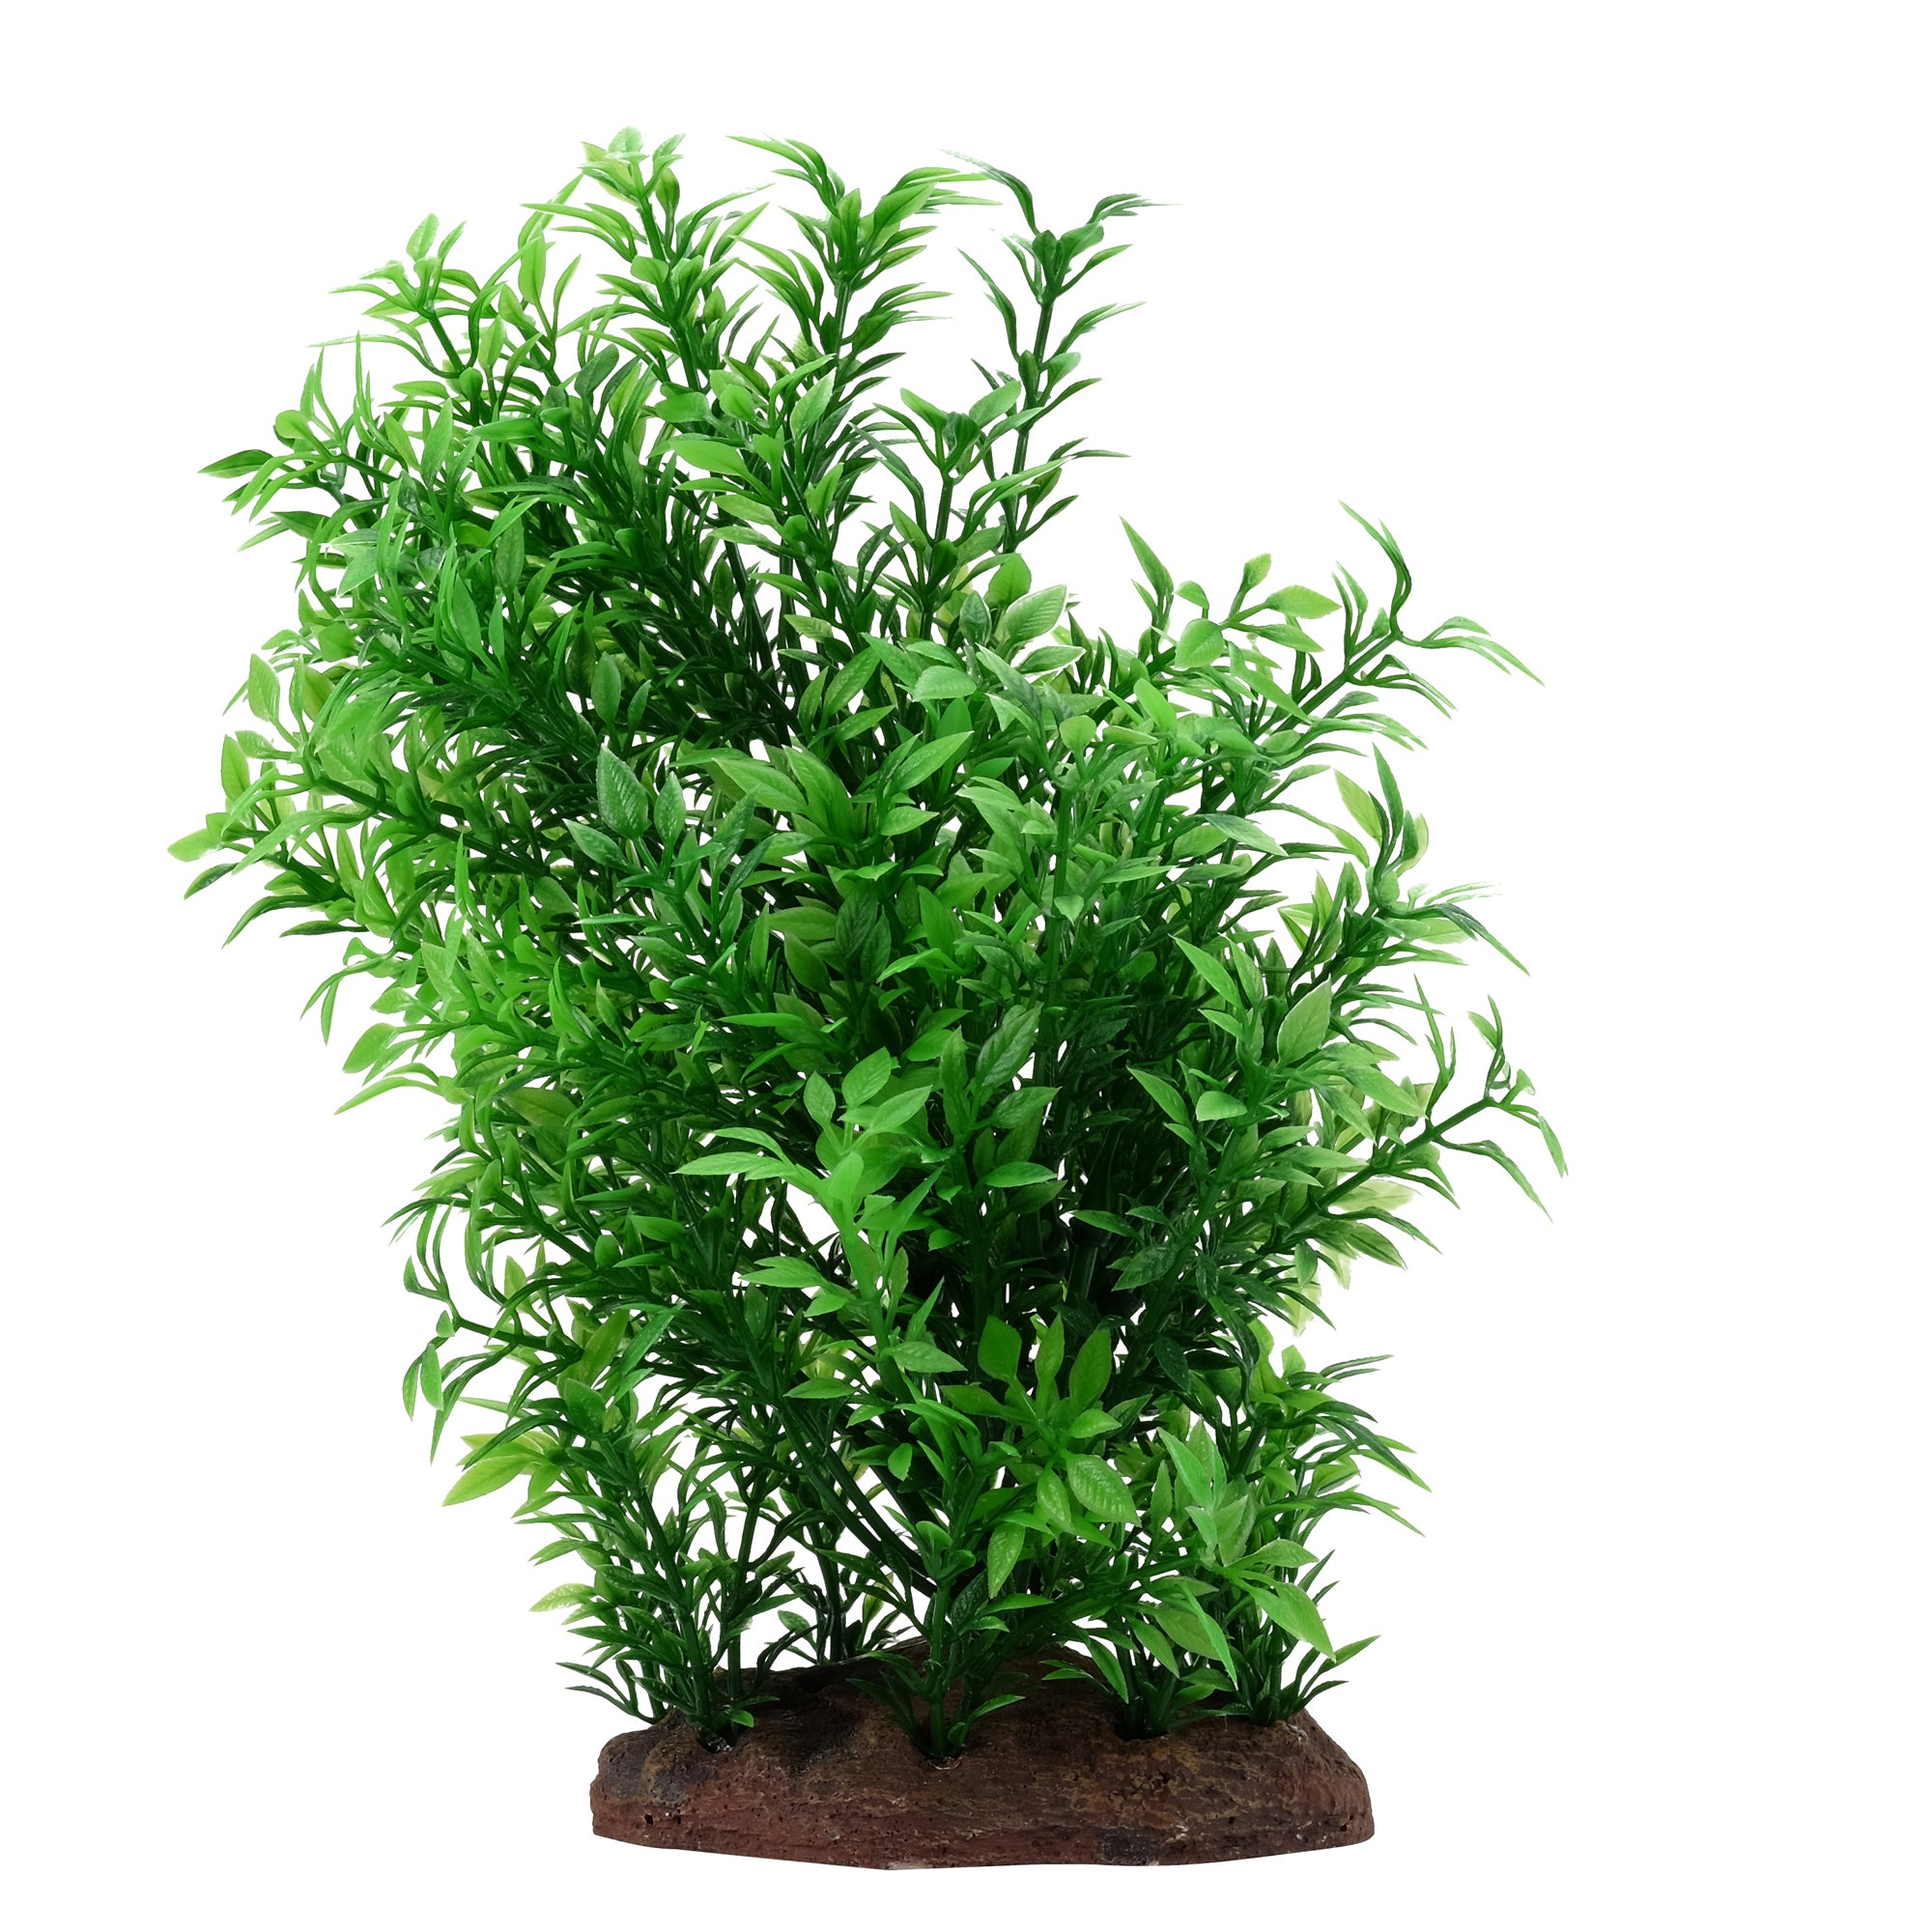 Fluval Plantscapes Small Helxine